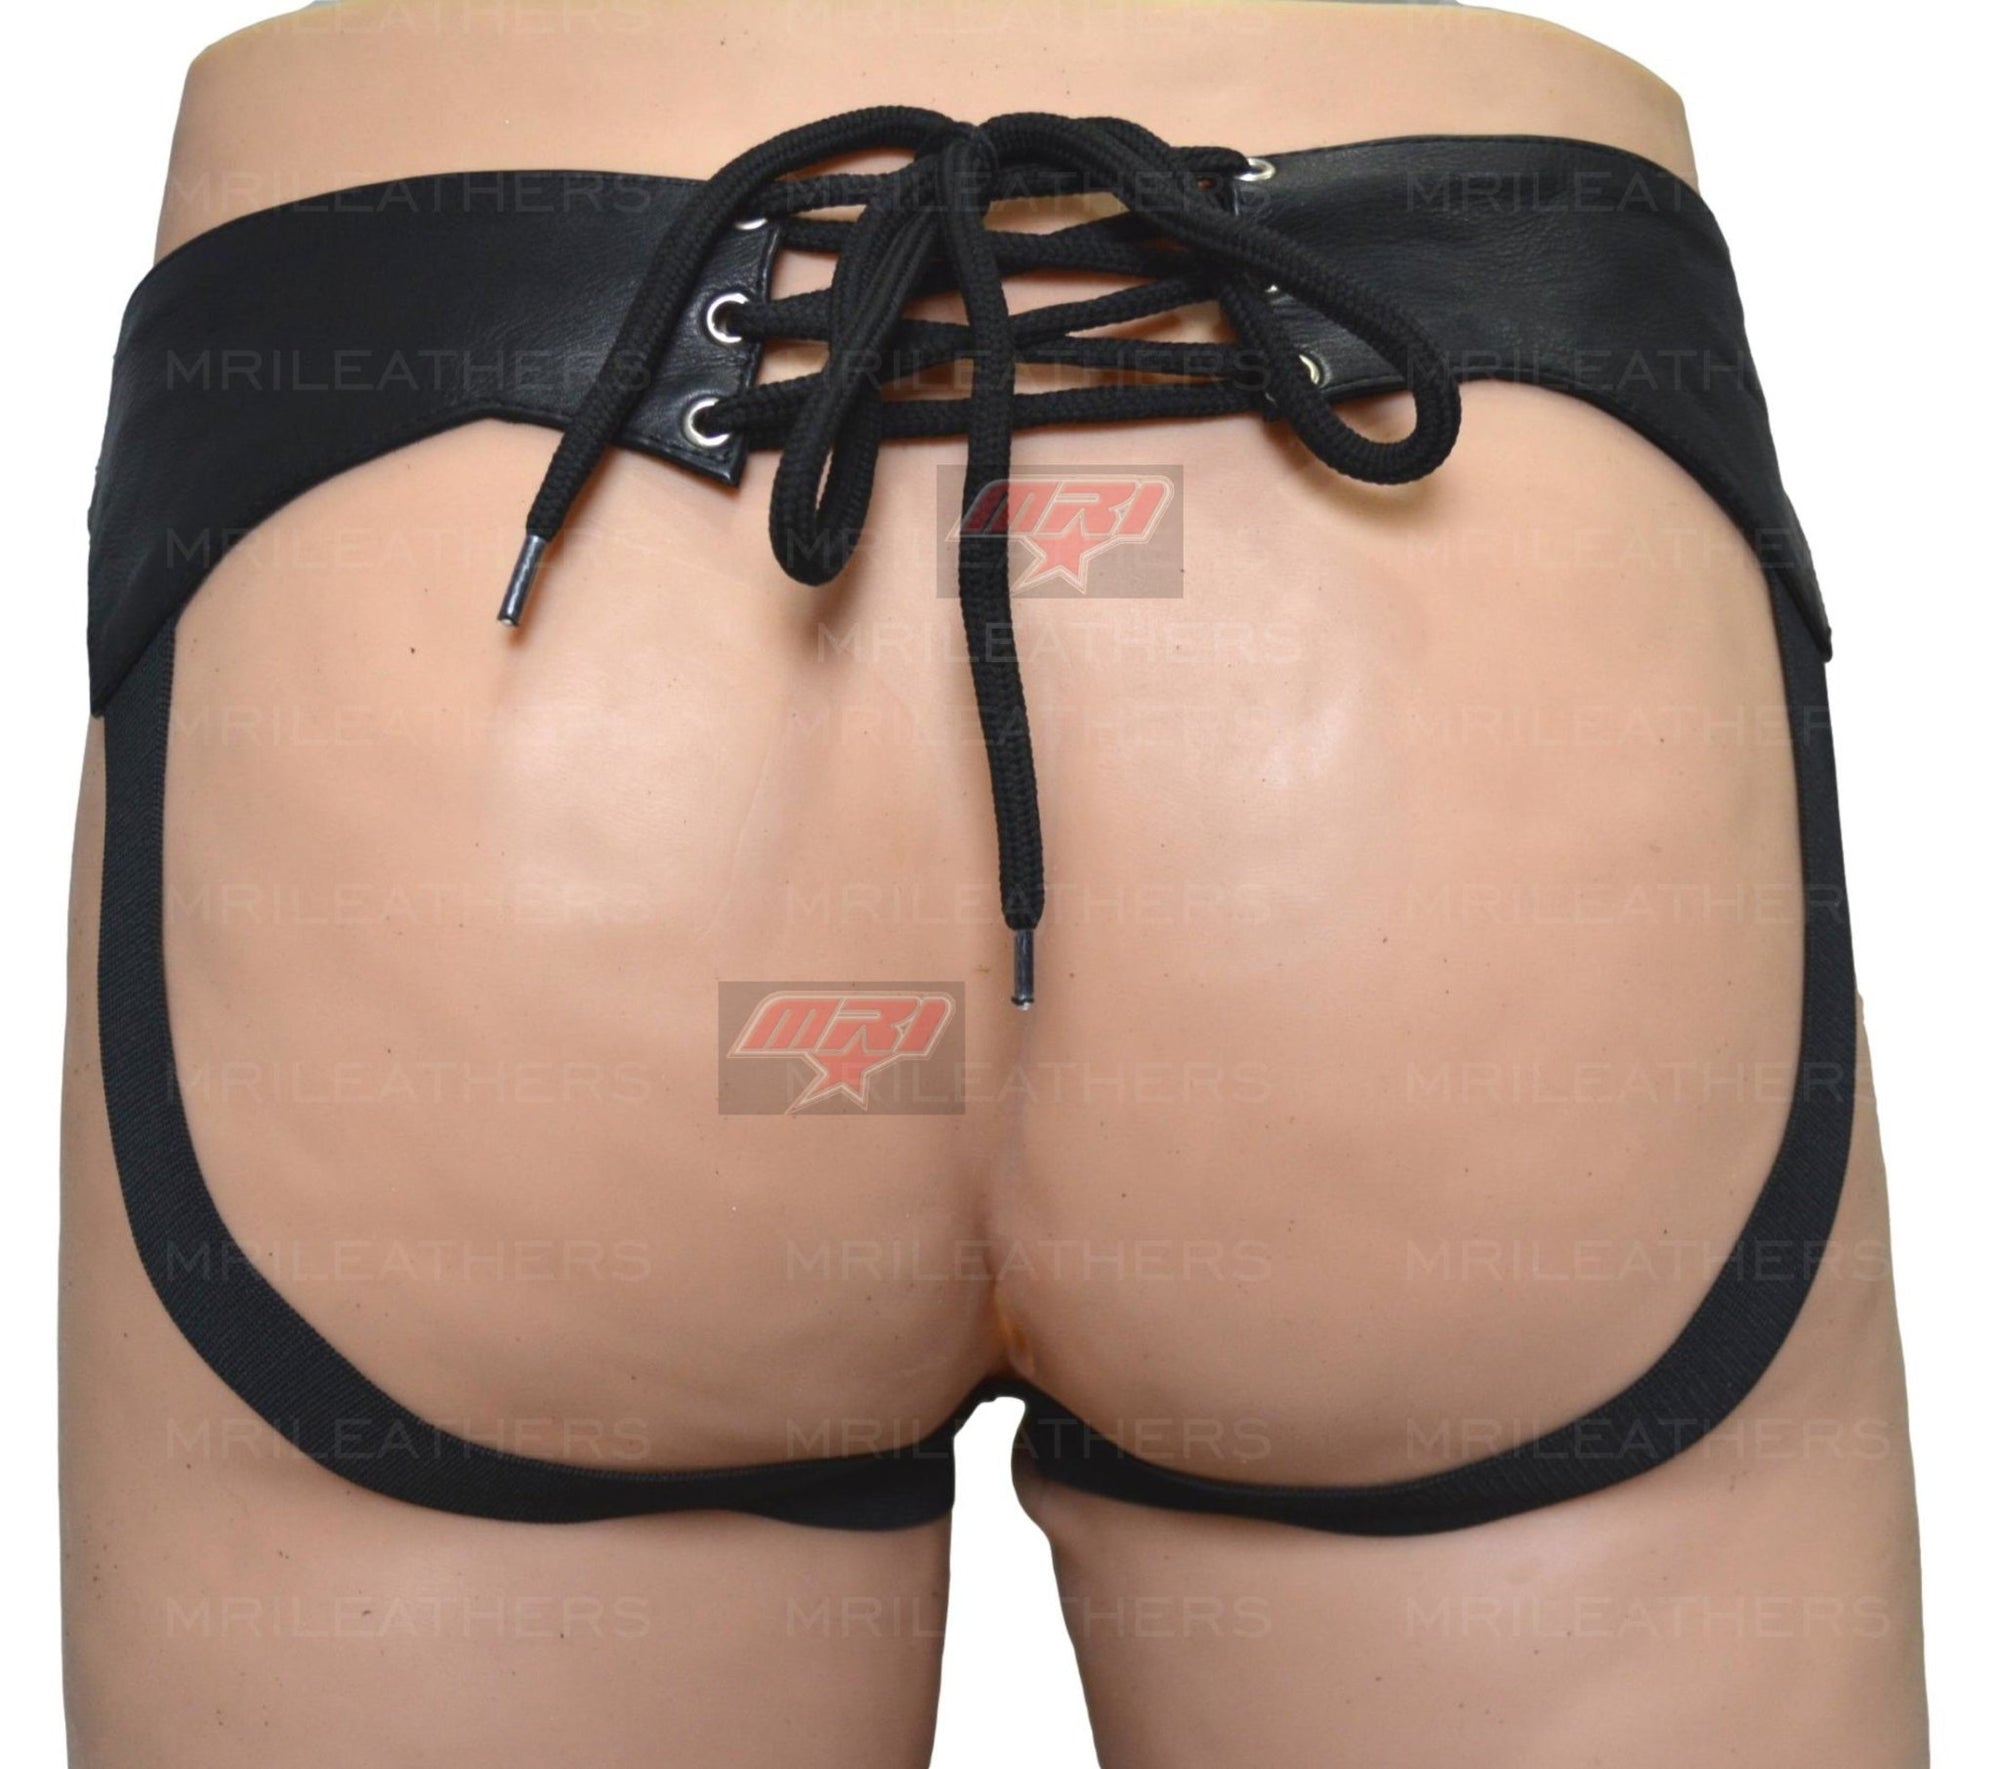 Men Leather Jockstrap -jock -thong removable pouch, lined with soft leather